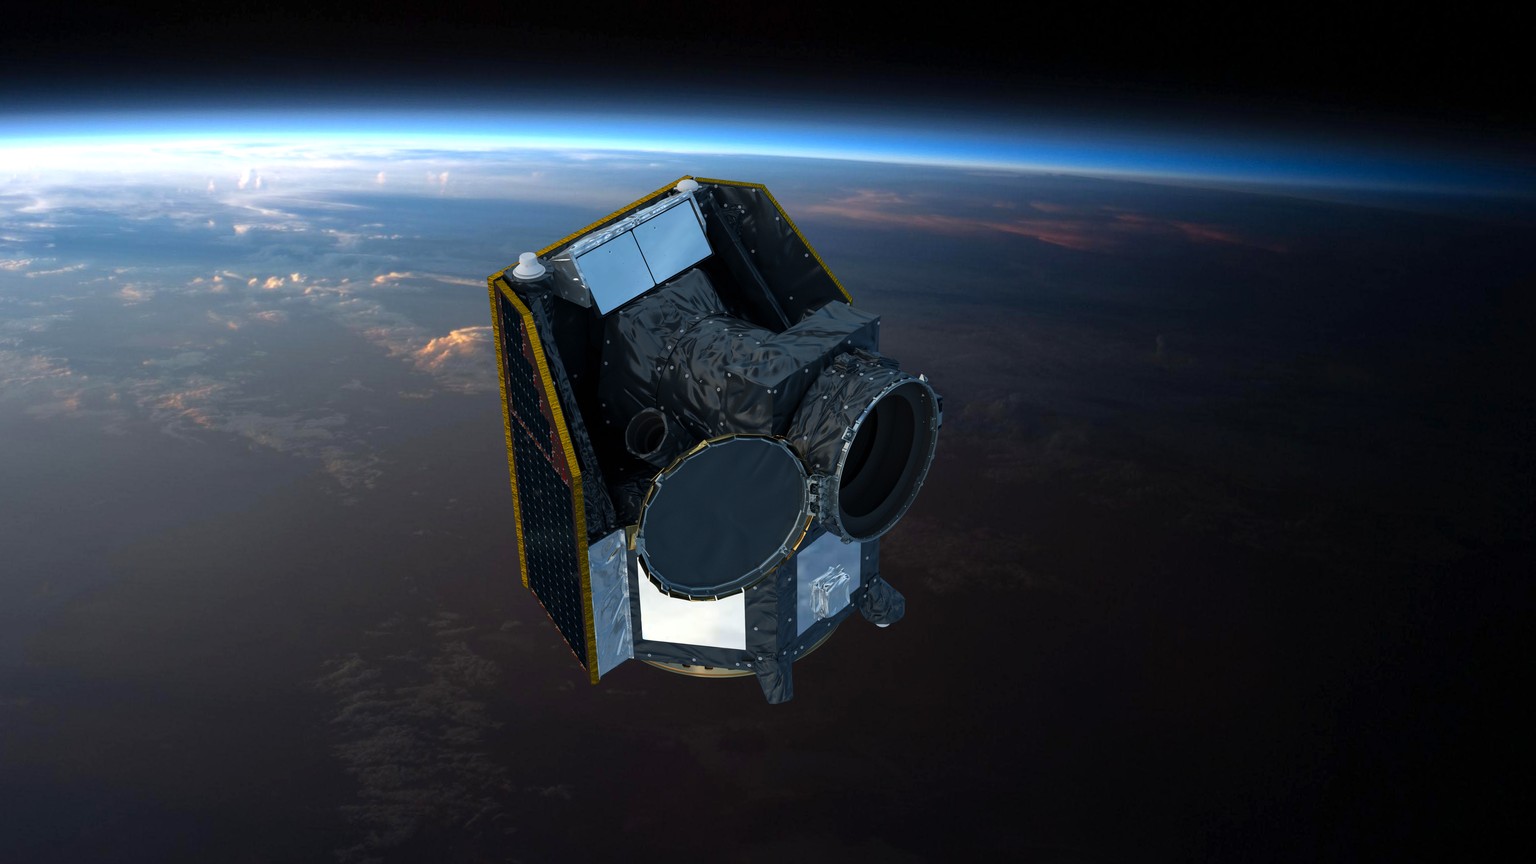 HANDOUT - Cheops, an exoplanet-observing satellite, illustration. In this view the satellite&#039;s telescope cover is closed. Cheops is the European Space Agency (ESA)&#039;s CHaracterising ExOPlanet ...